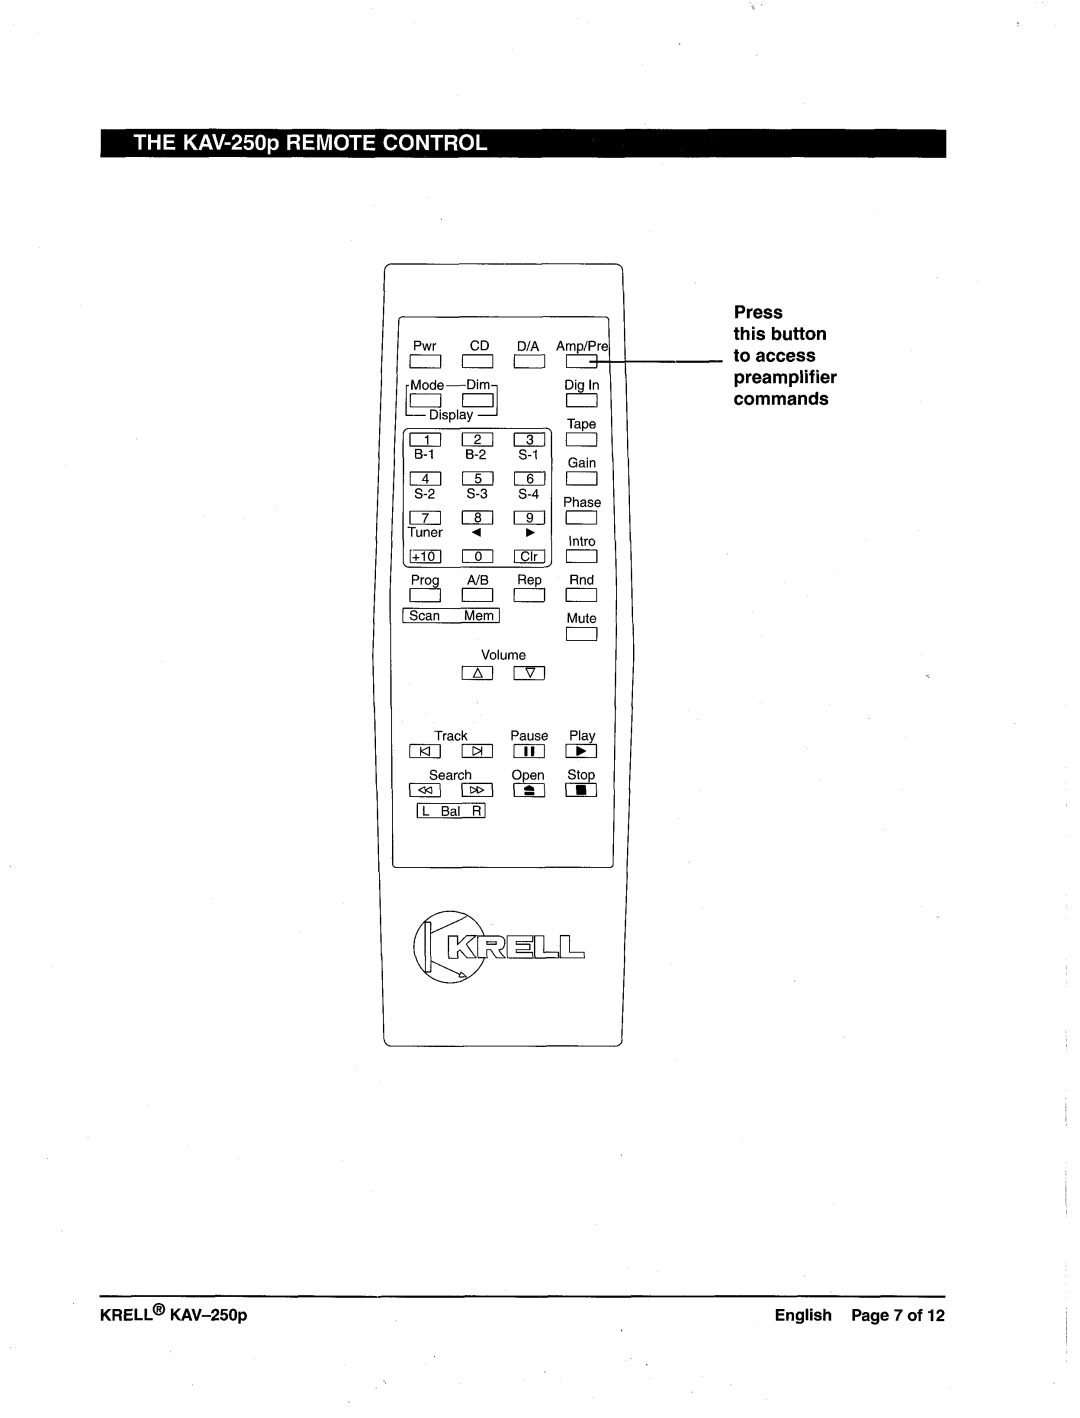 Krell Industries manual THE KAV-250pREMOTECONTROL, Press this button to access preamplifier commands 